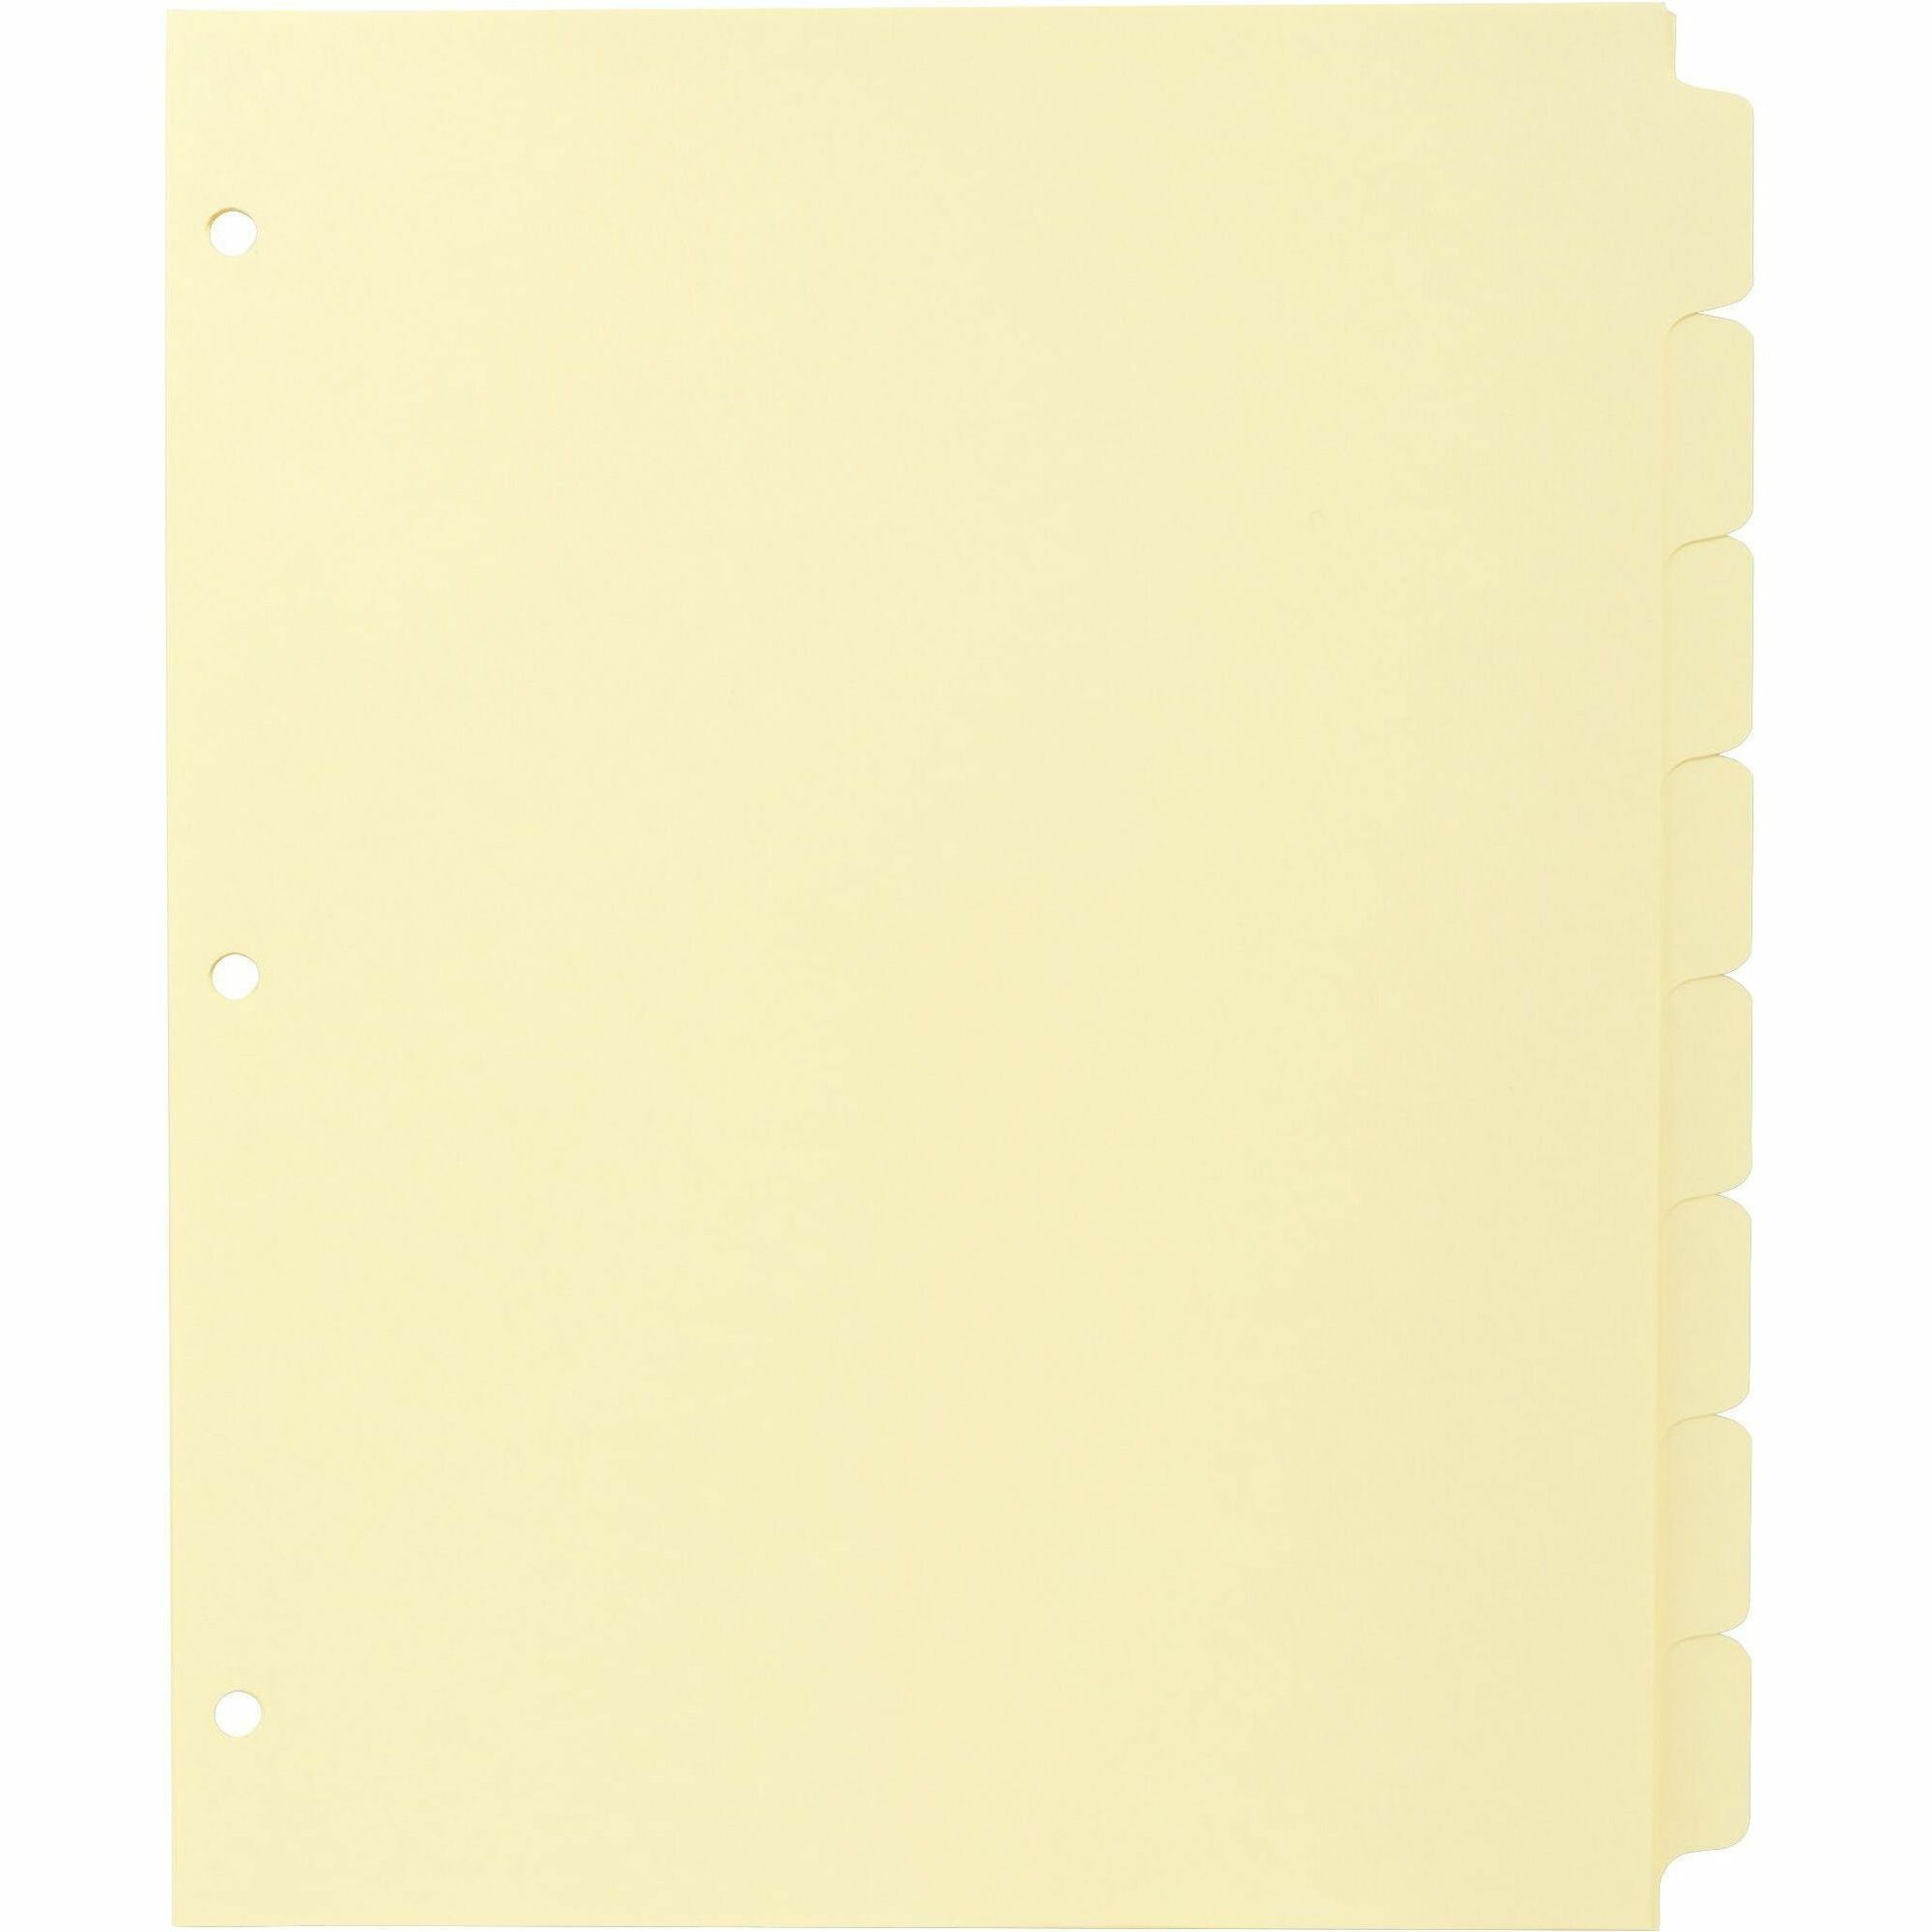 Business Source Mylar-reinforced Plain Tab Indexes - 8 Write-on Tab(s) - 8.5" Divider Width x 11" Divider Length - Letter - 3 Hole Punched - Canary Tab(s) - Hole-punched, Mylar Reinforced Edge - 24 / Box - 